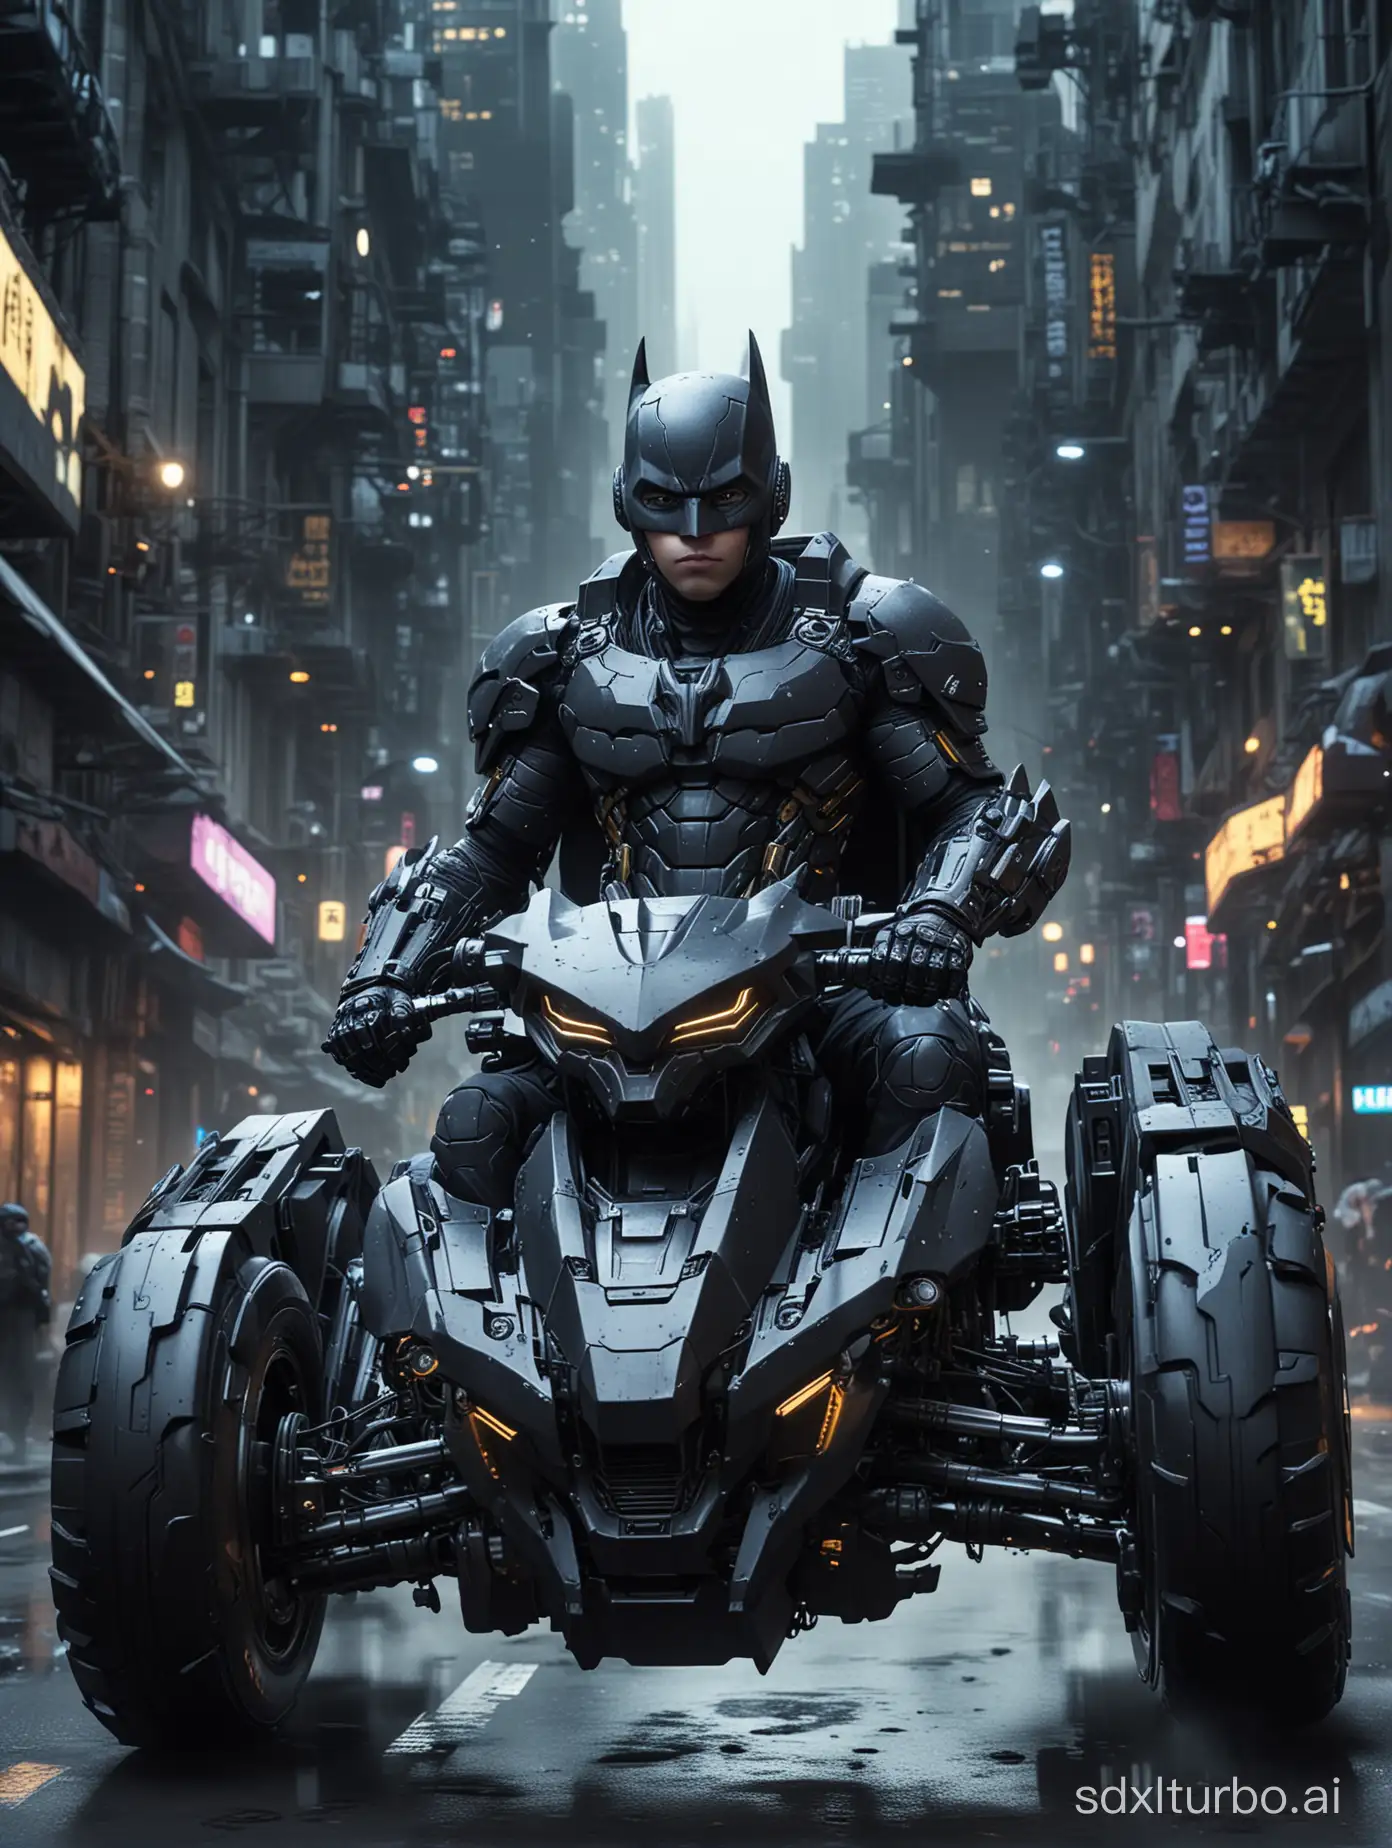 Science fiction, a child wearing Batman armor, riding a cool mecha car, very fast, able to see facial features and hair, with a background of cyber-style urban night scenery, slightly dark,